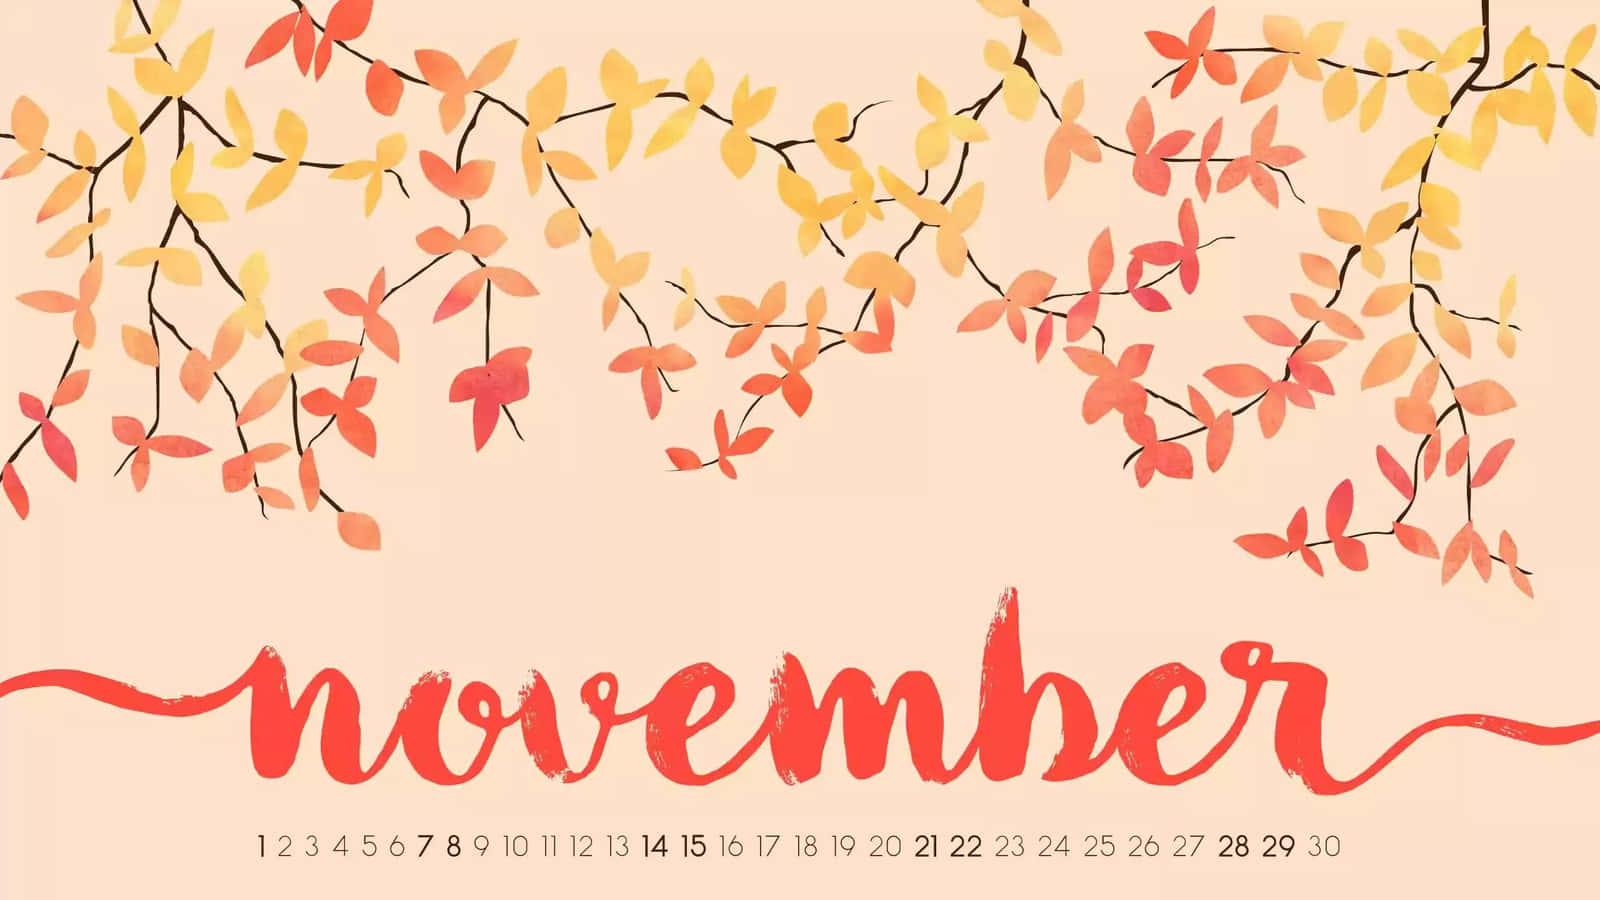 November is a time of warmth and joy